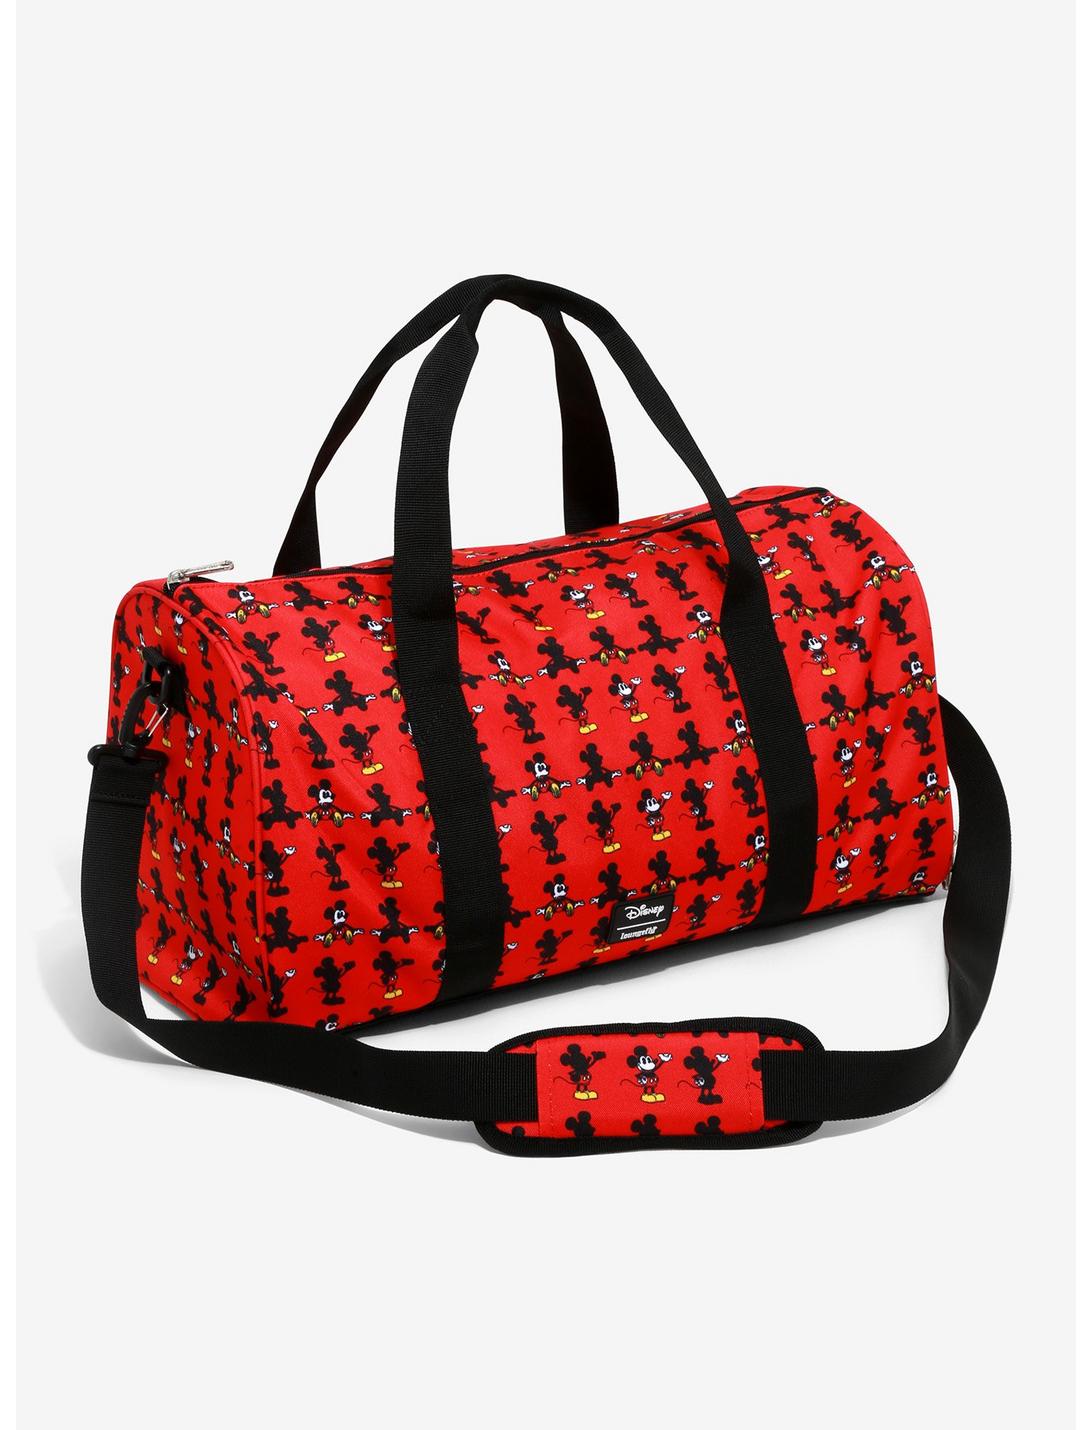 Loungefly Disney Mickey Mouse Duffel Bag, , hi-res